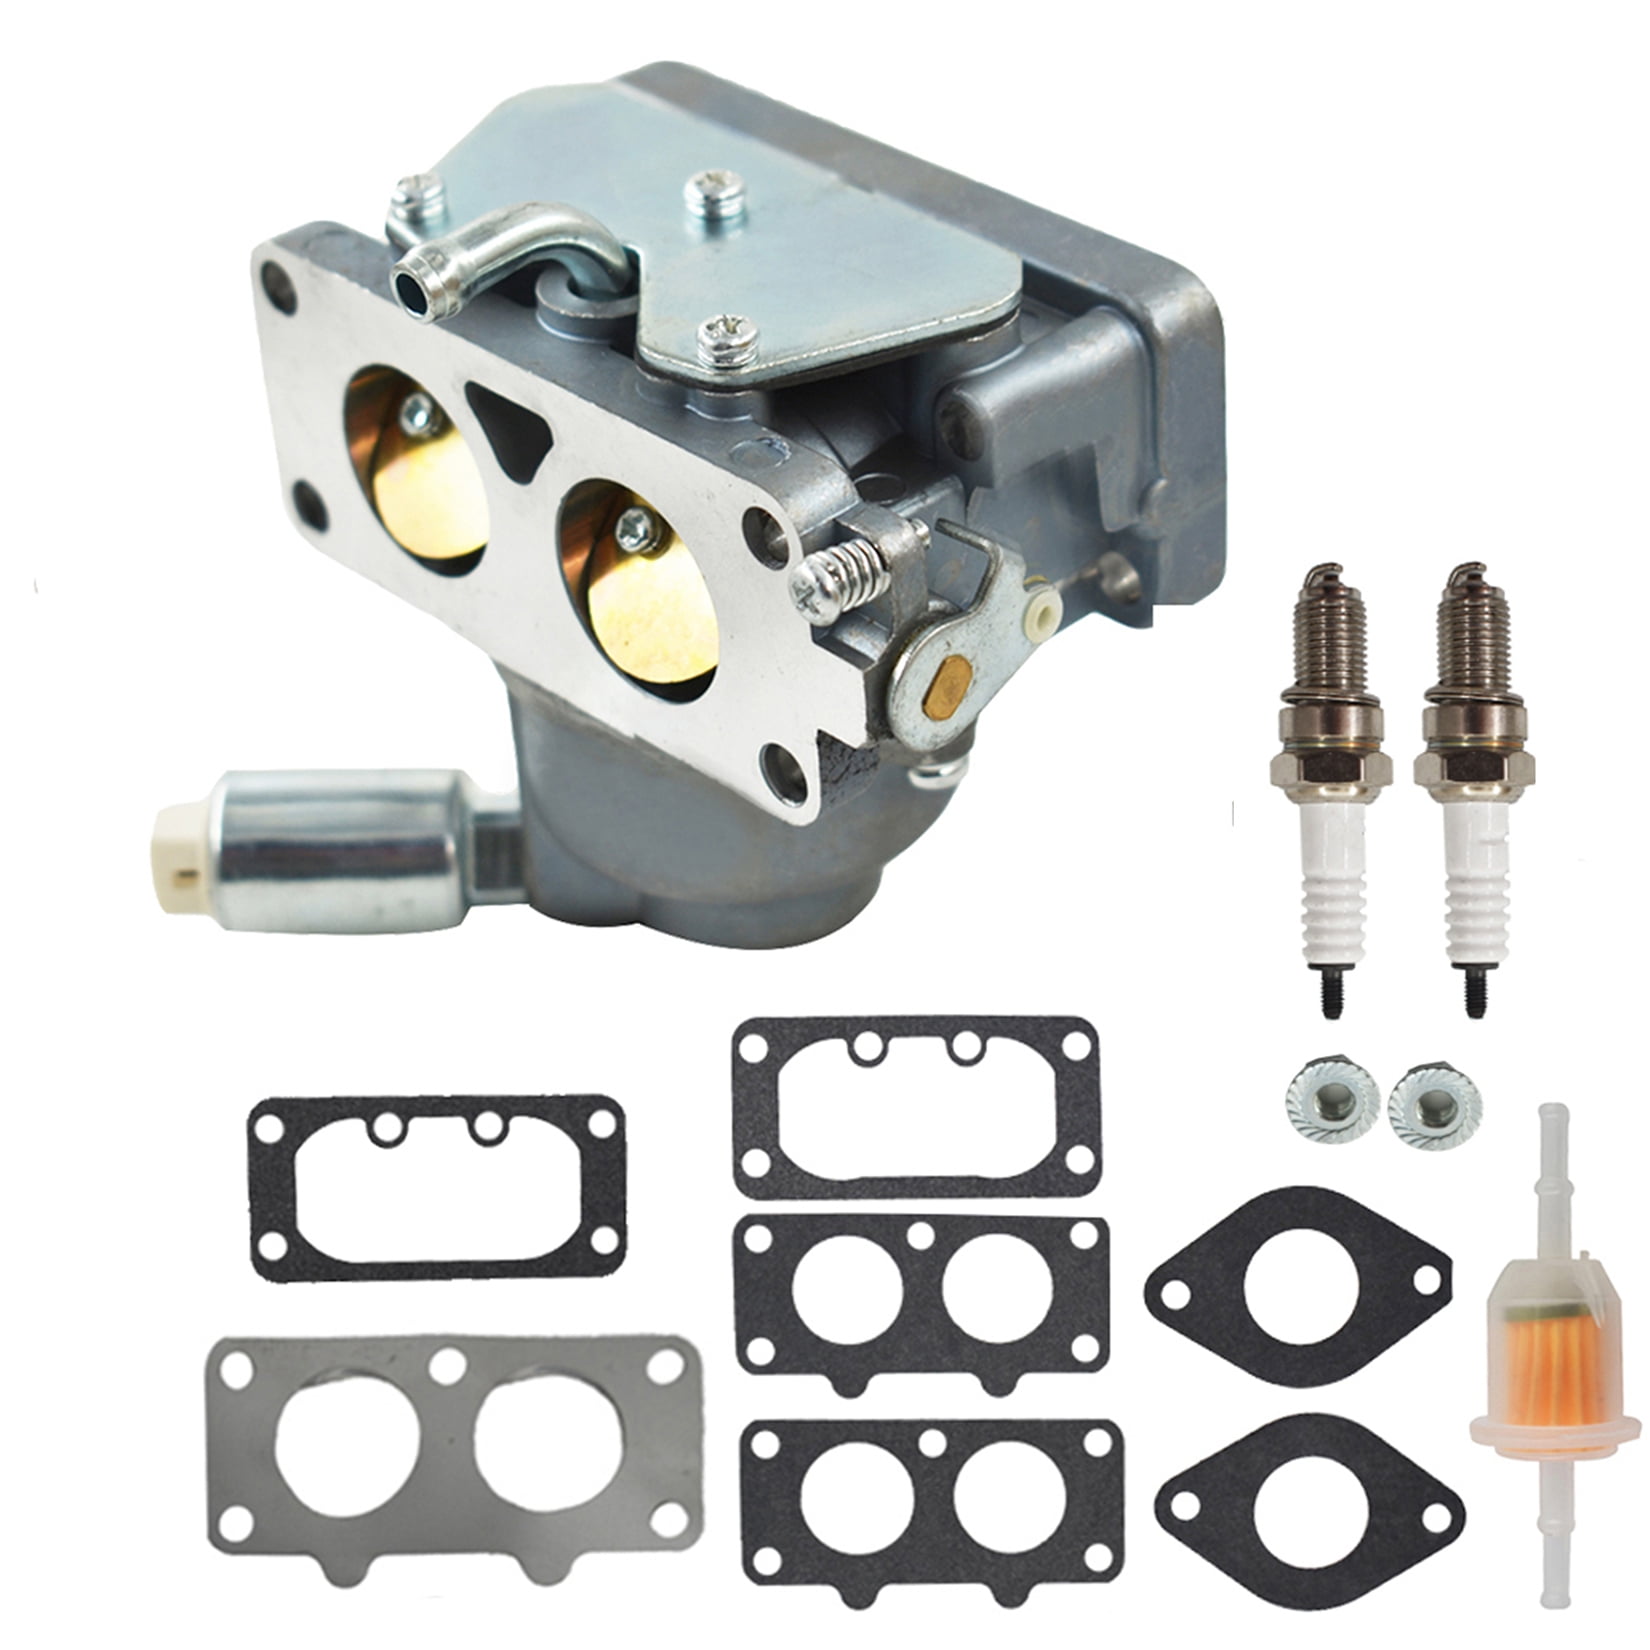 Carburetor replacement for B&S 405777 406777 407677 407777 441777 442577 445677 445705 445777 445877 445977 446677 446777 446877 446977 40F777 40G777 40H777 44677A V-Twin 20HP 21HP 22HP 23HP 24HP 25HP 